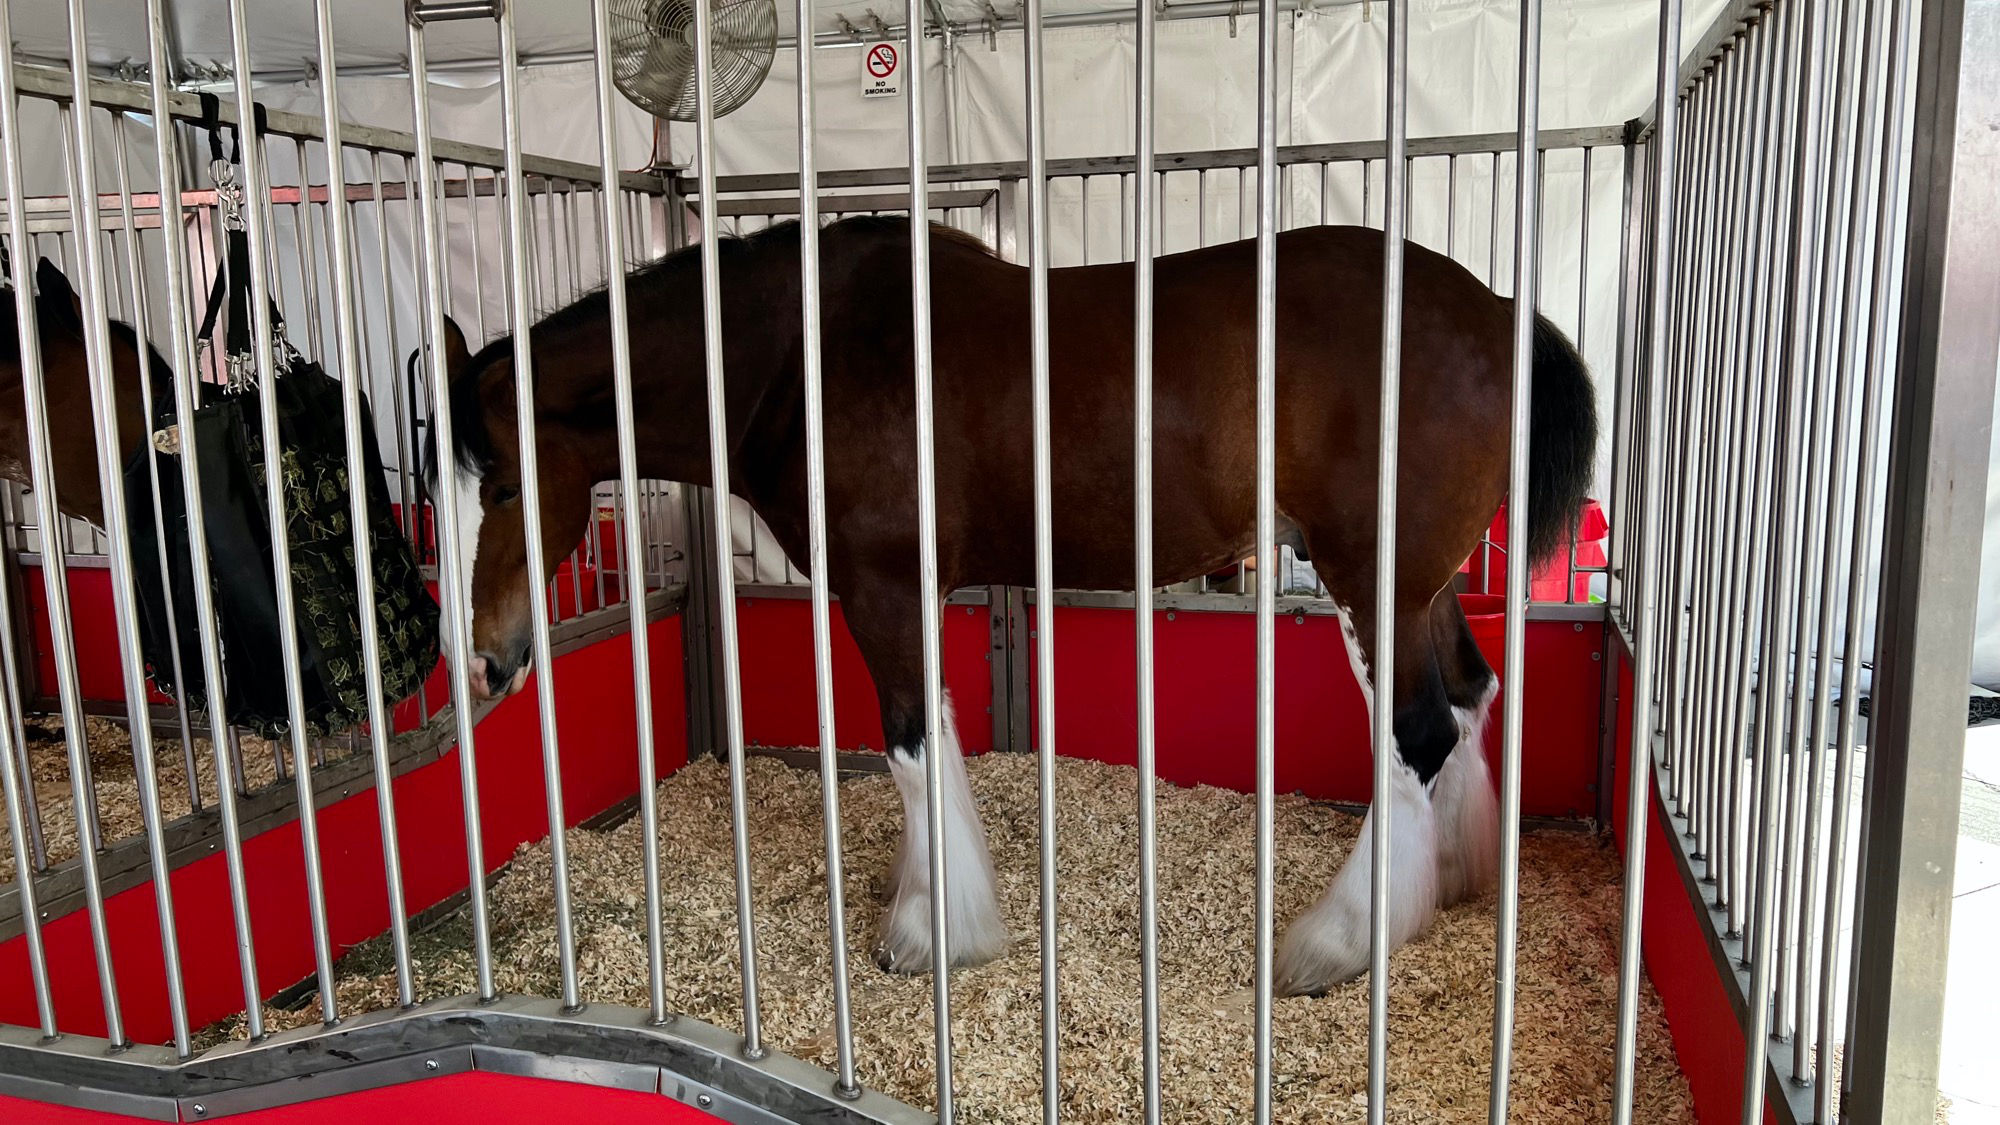 Budweiser Clydesdales 2